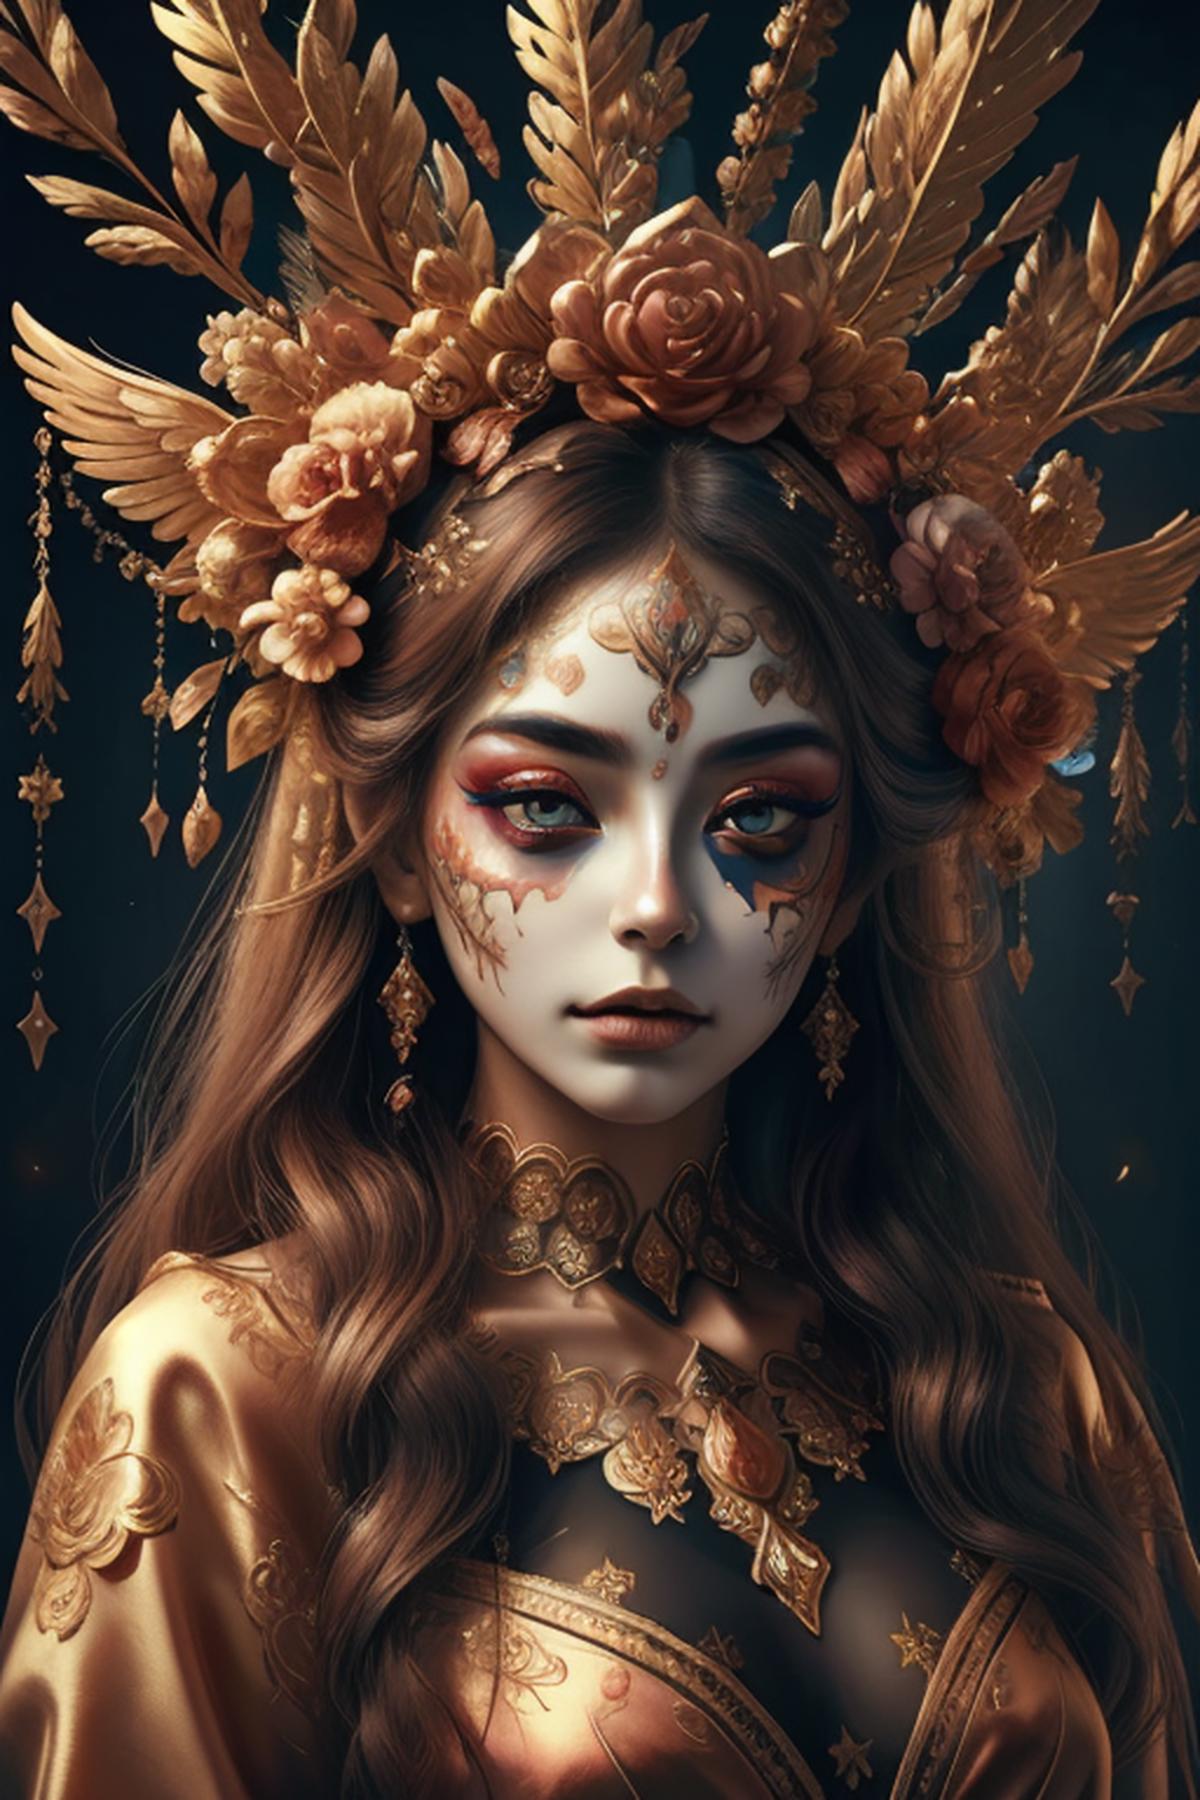 Face and Body Paint Concept image by YuntaoHu